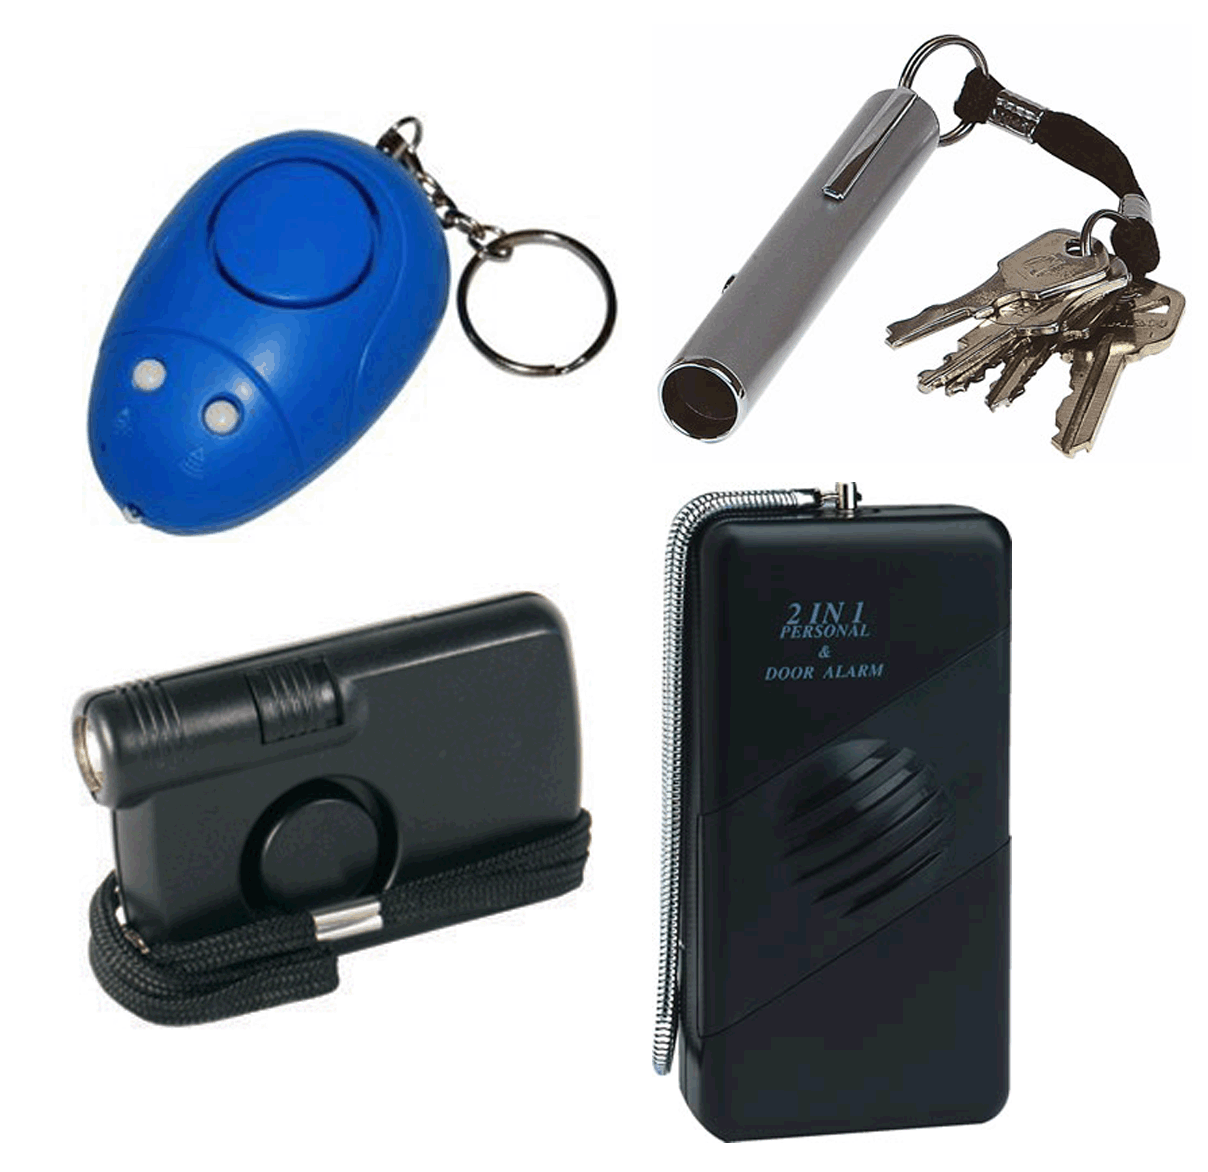 PERSONAL ALARMS